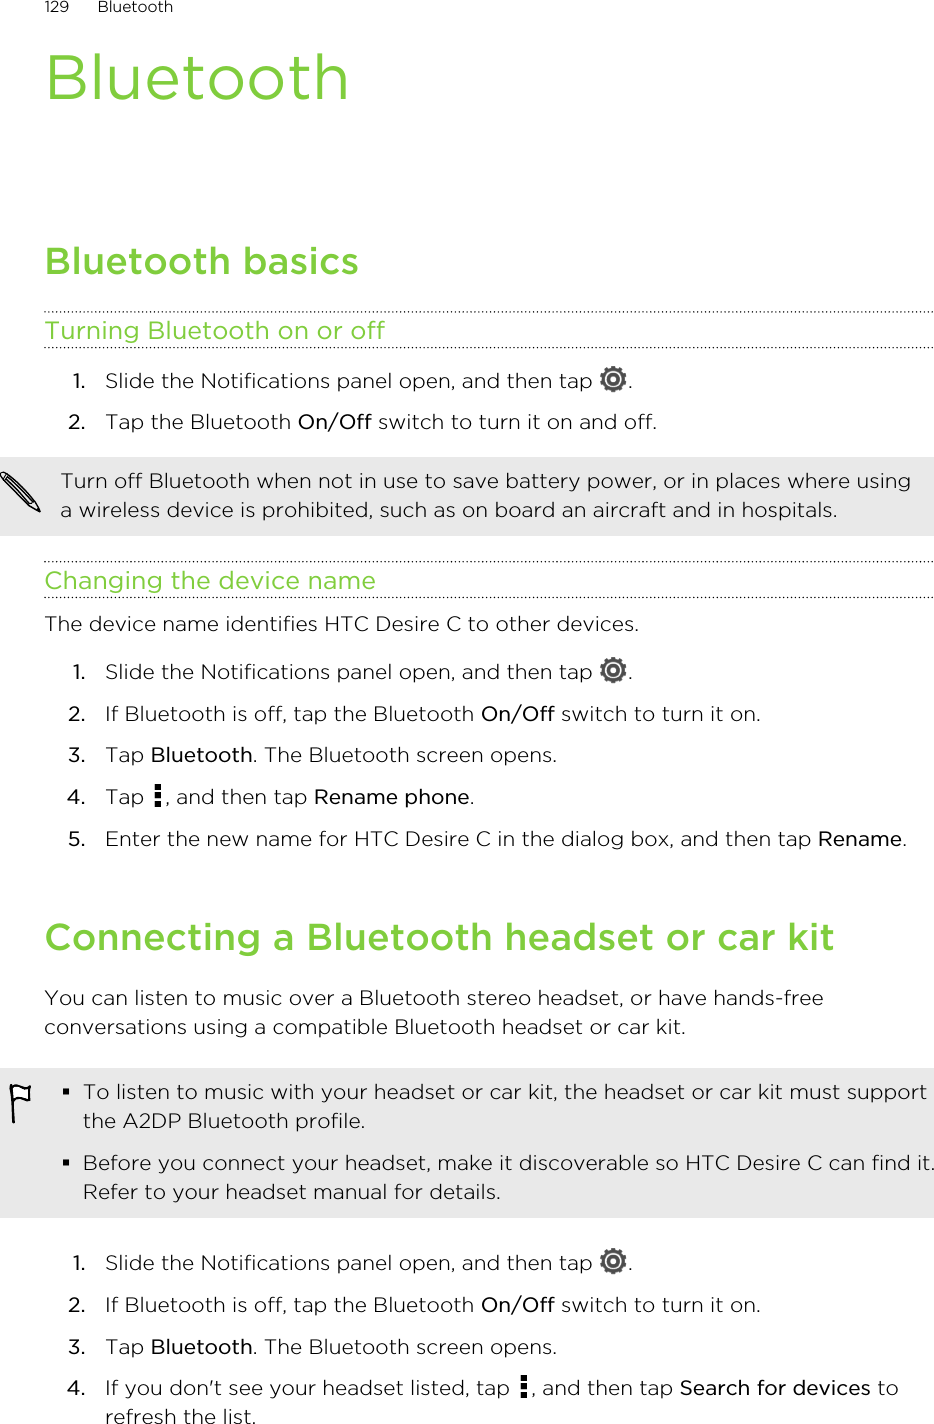 BluetoothBluetooth basicsTurning Bluetooth on or off1. Slide the Notifications panel open, and then tap  .2. Tap the Bluetooth On/Off switch to turn it on and off.Turn off Bluetooth when not in use to save battery power, or in places where usinga wireless device is prohibited, such as on board an aircraft and in hospitals.Changing the device nameThe device name identifies HTC Desire C to other devices.1. Slide the Notifications panel open, and then tap  .2. If Bluetooth is off, tap the Bluetooth On/Off switch to turn it on.3. Tap Bluetooth. The Bluetooth screen opens.4. Tap  , and then tap Rename phone.5. Enter the new name for HTC Desire C in the dialog box, and then tap Rename.Connecting a Bluetooth headset or car kitYou can listen to music over a Bluetooth stereo headset, or have hands-freeconversations using a compatible Bluetooth headset or car kit.§To listen to music with your headset or car kit, the headset or car kit must supportthe A2DP Bluetooth profile.§Before you connect your headset, make it discoverable so HTC Desire C can find it.Refer to your headset manual for details.1. Slide the Notifications panel open, and then tap  .2. If Bluetooth is off, tap the Bluetooth On/Off switch to turn it on.3. Tap Bluetooth. The Bluetooth screen opens.4. If you don&apos;t see your headset listed, tap  , and then tap Search for devices torefresh the list.129 Bluetooth